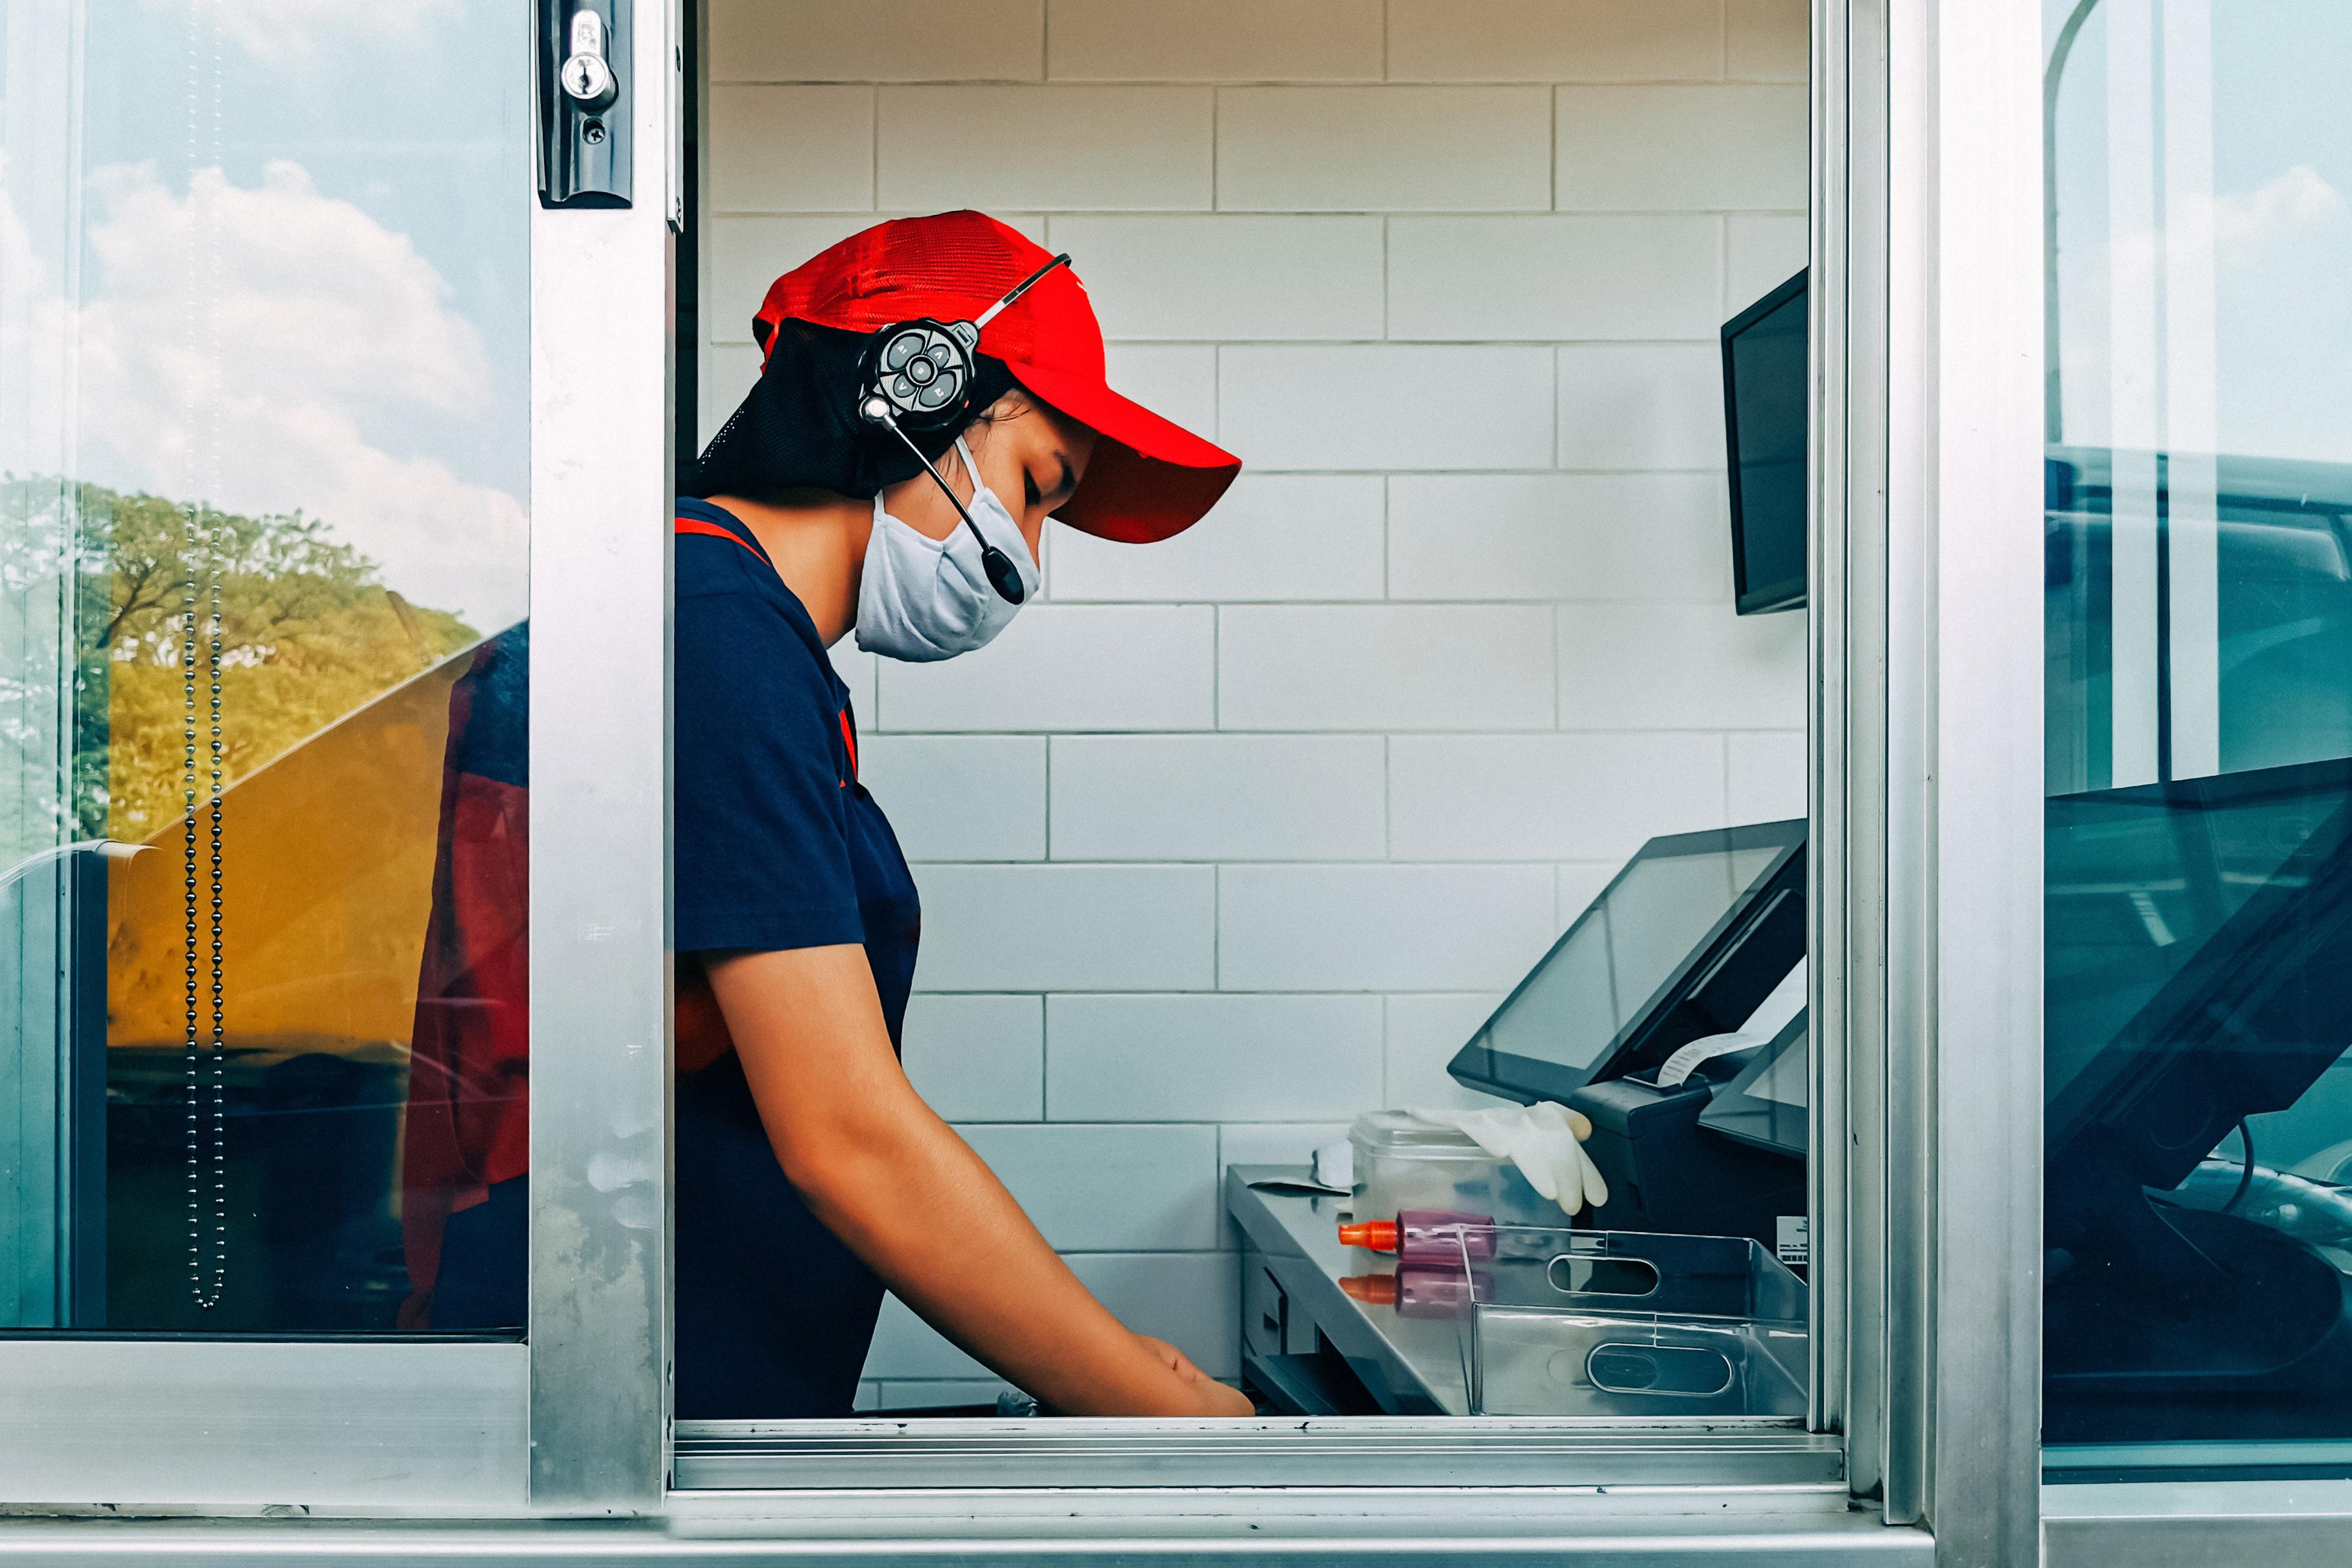 Worker at serving window